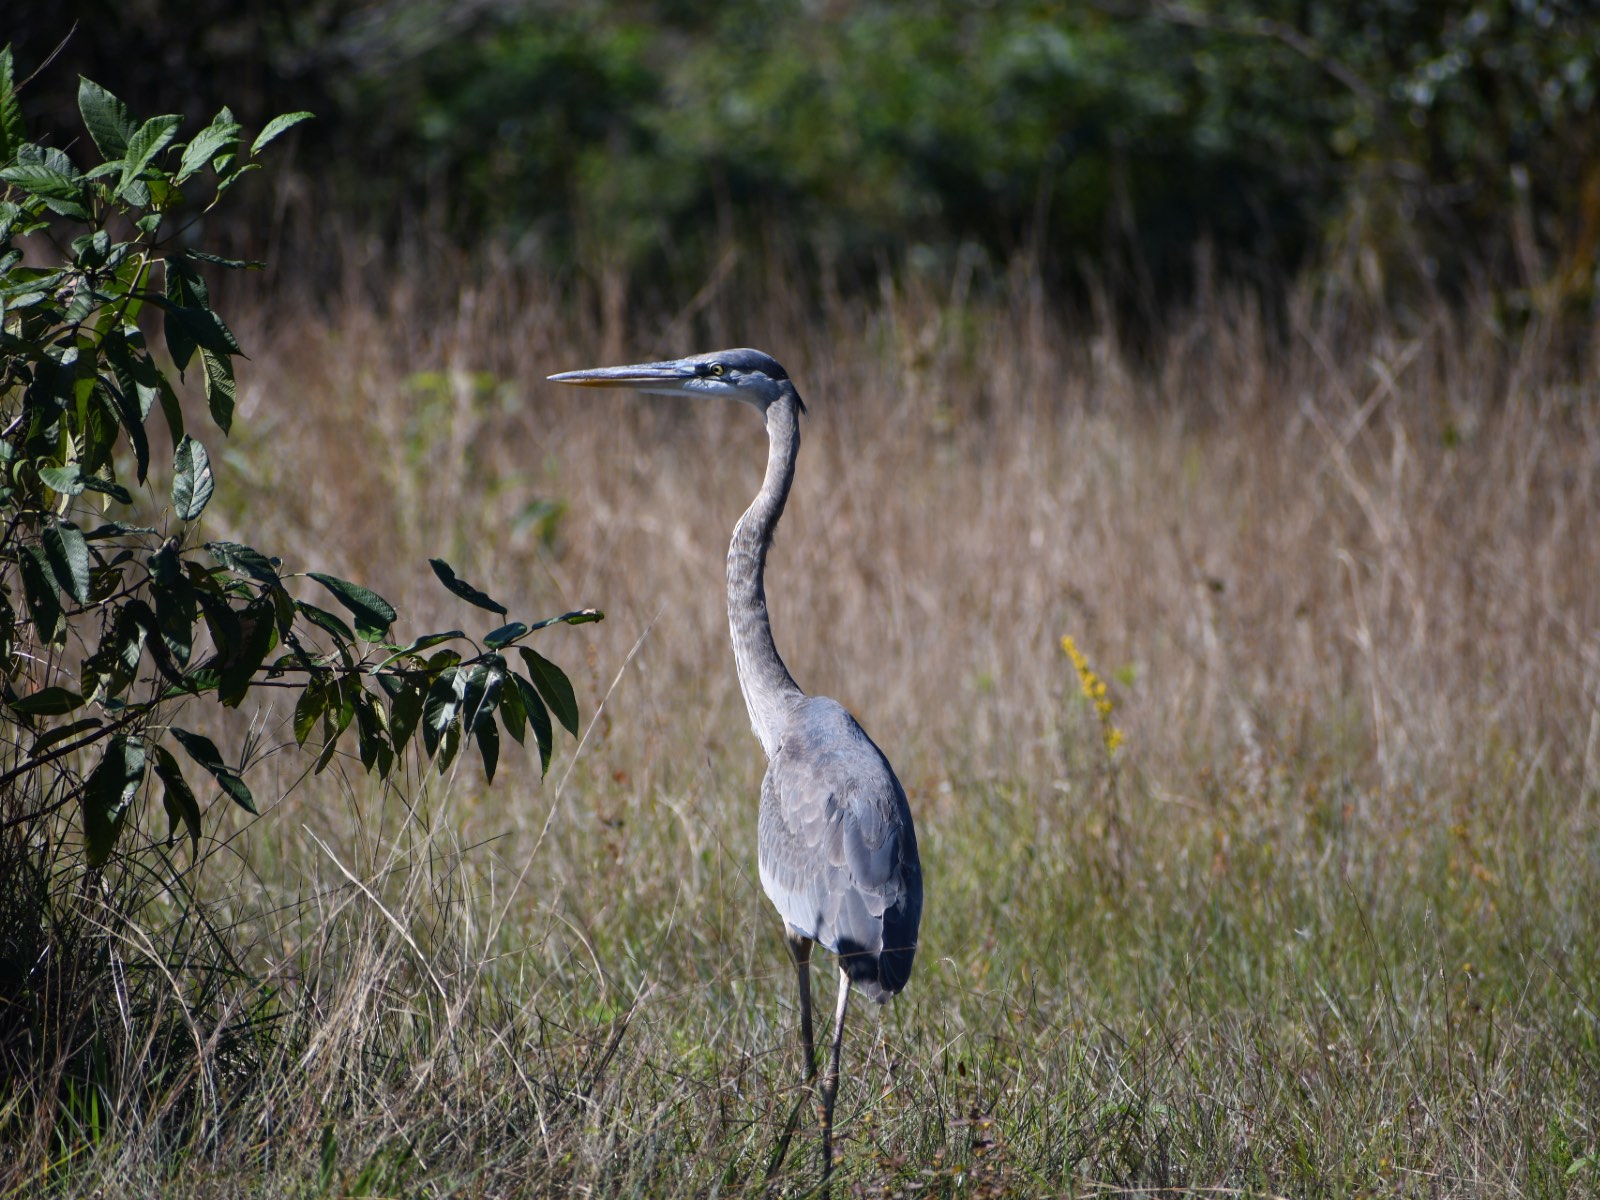 A crane standing in the grass.